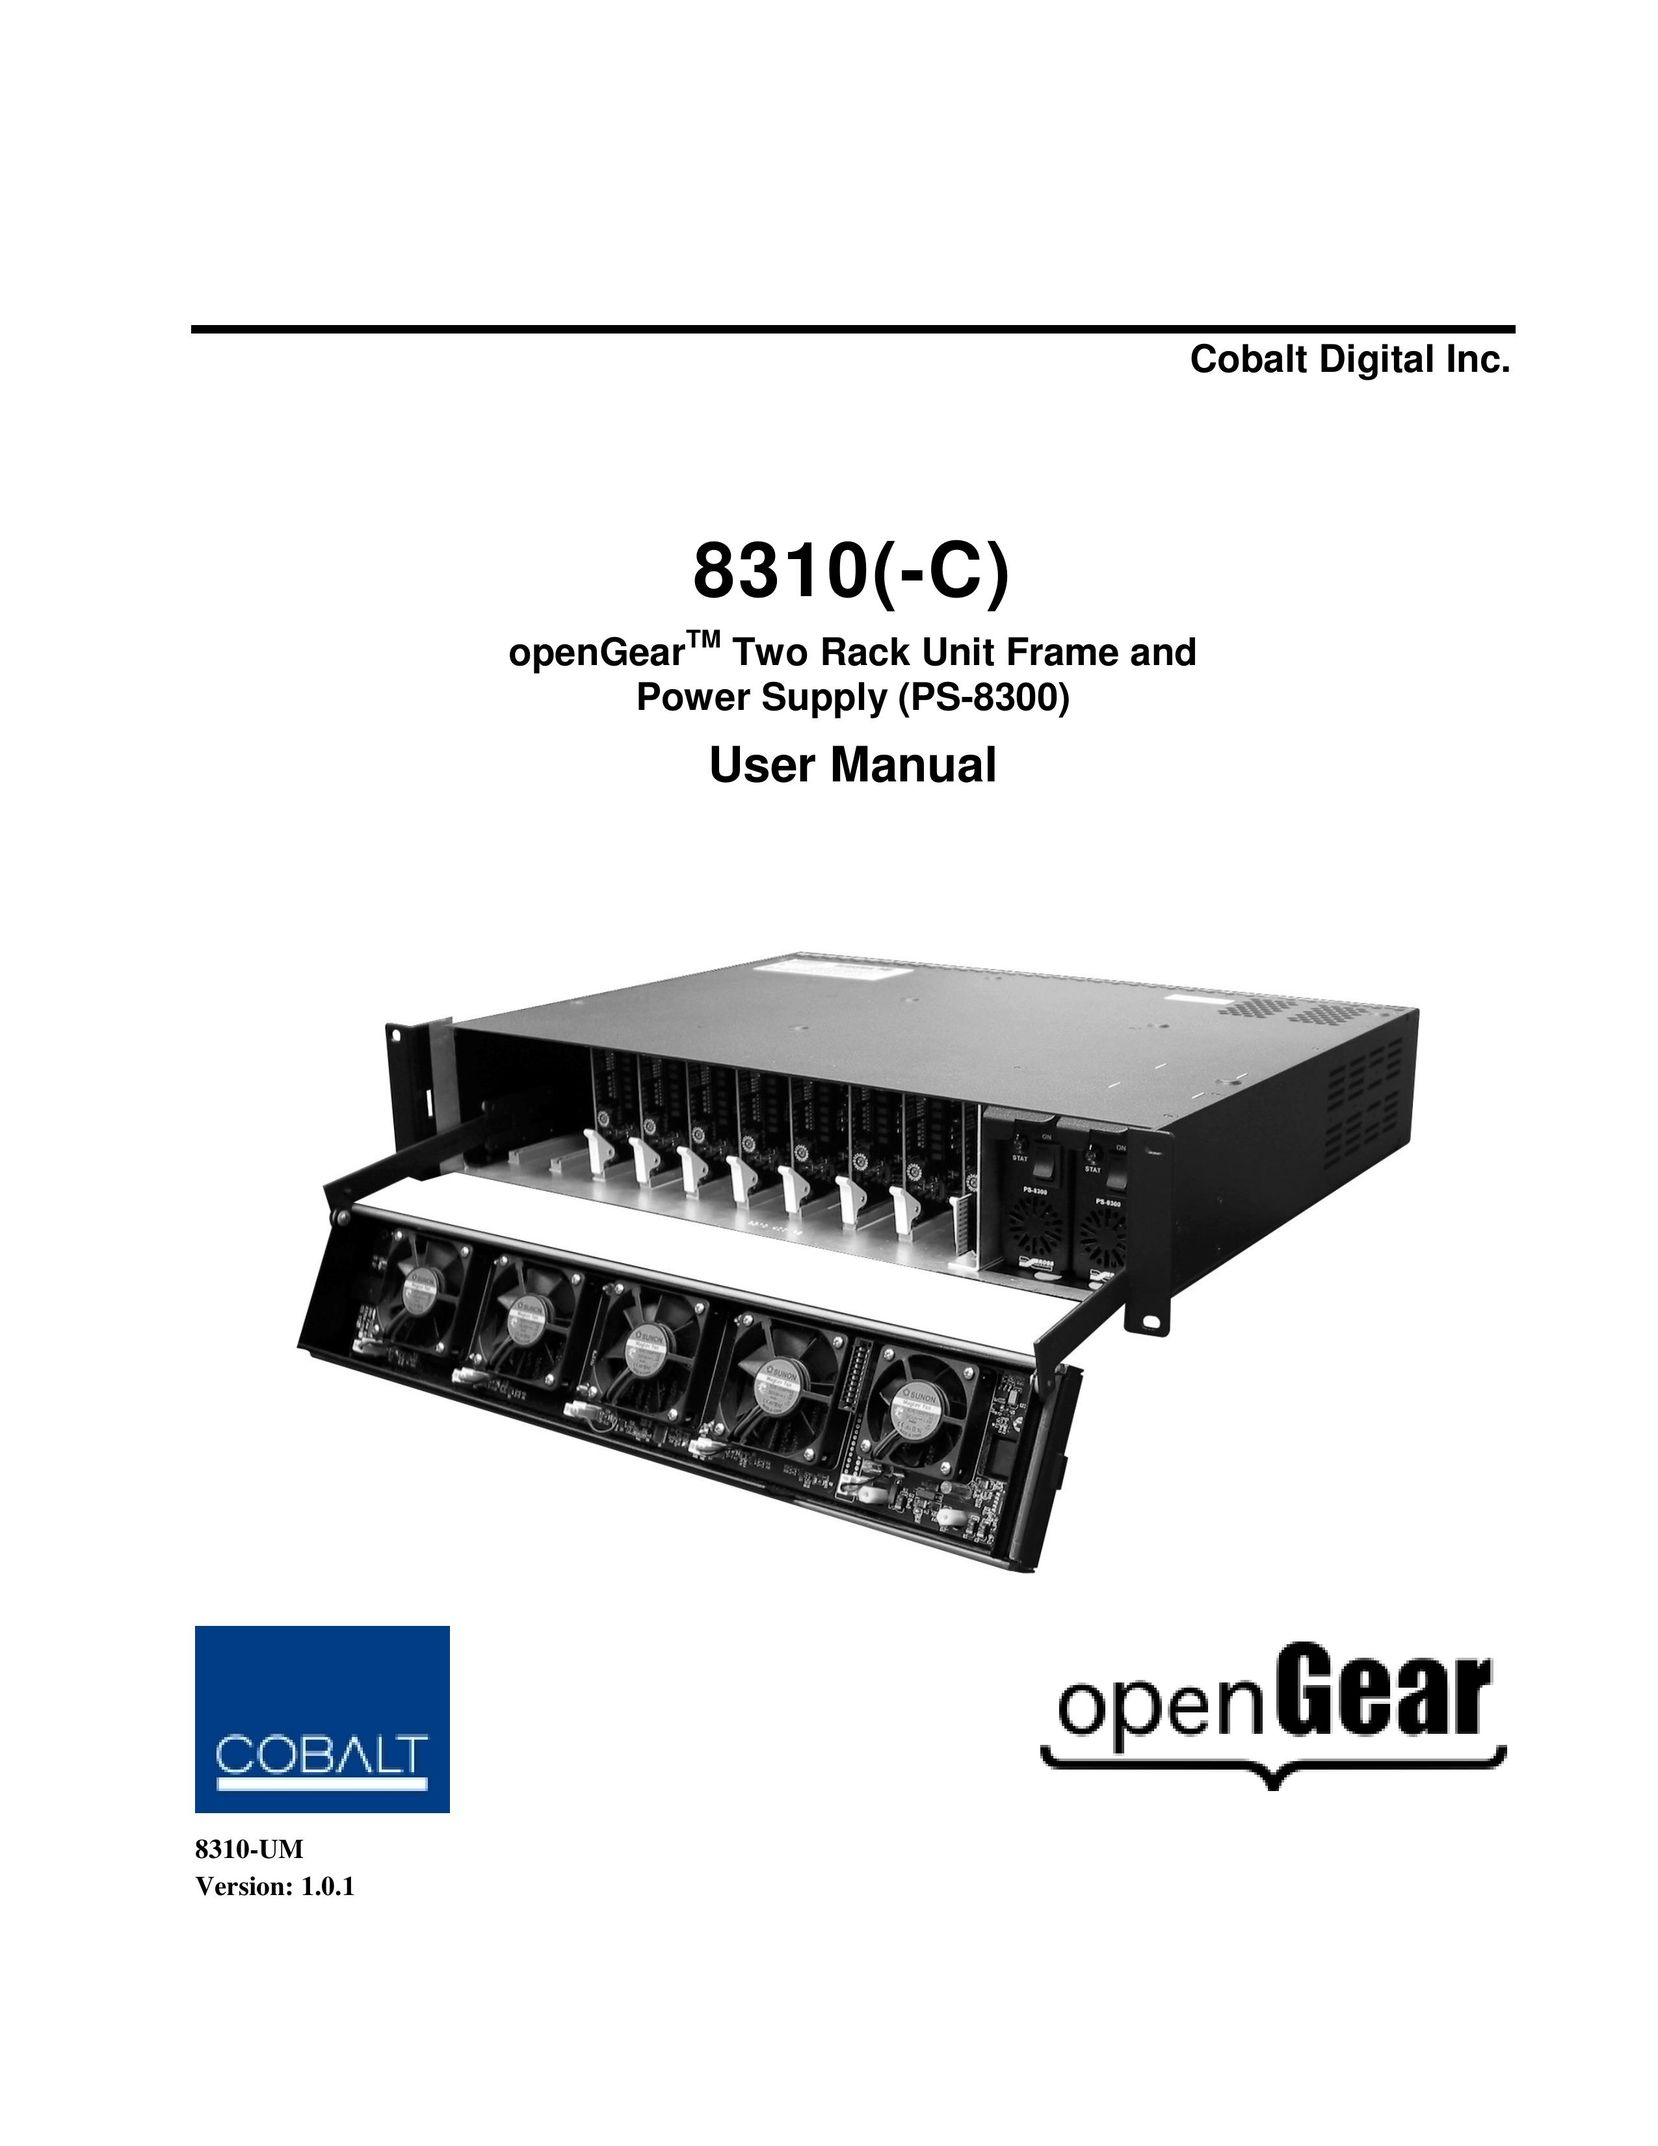 Cobalt Networks PS-8300 Power Supply User Manual